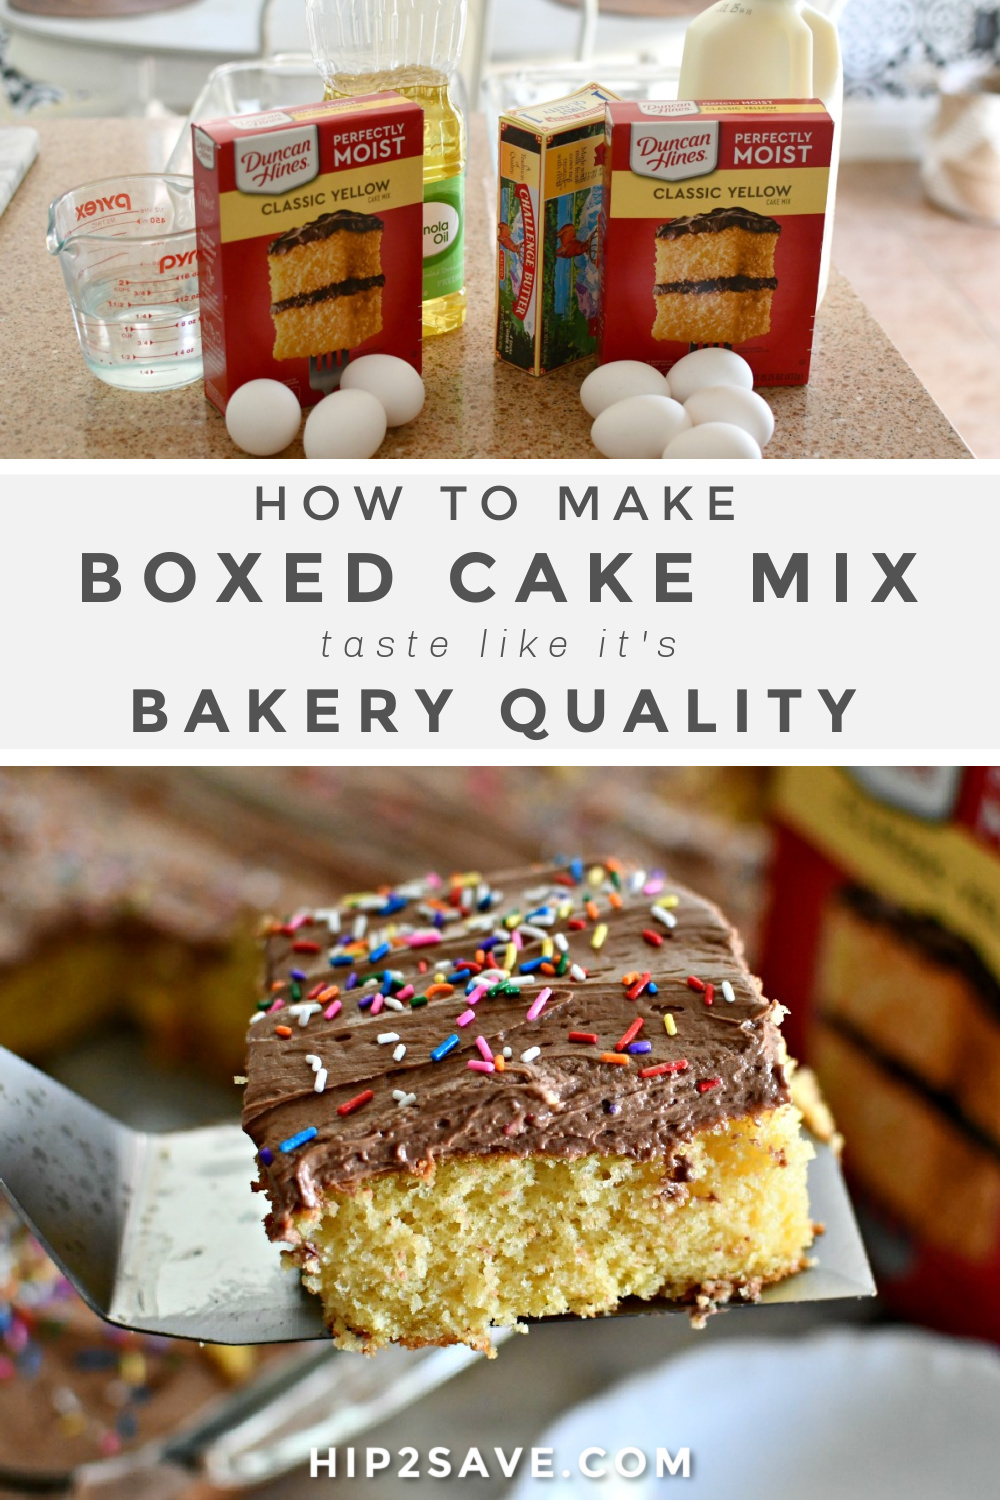 Different Ways to Make Boxed Cake Mix Taste Better